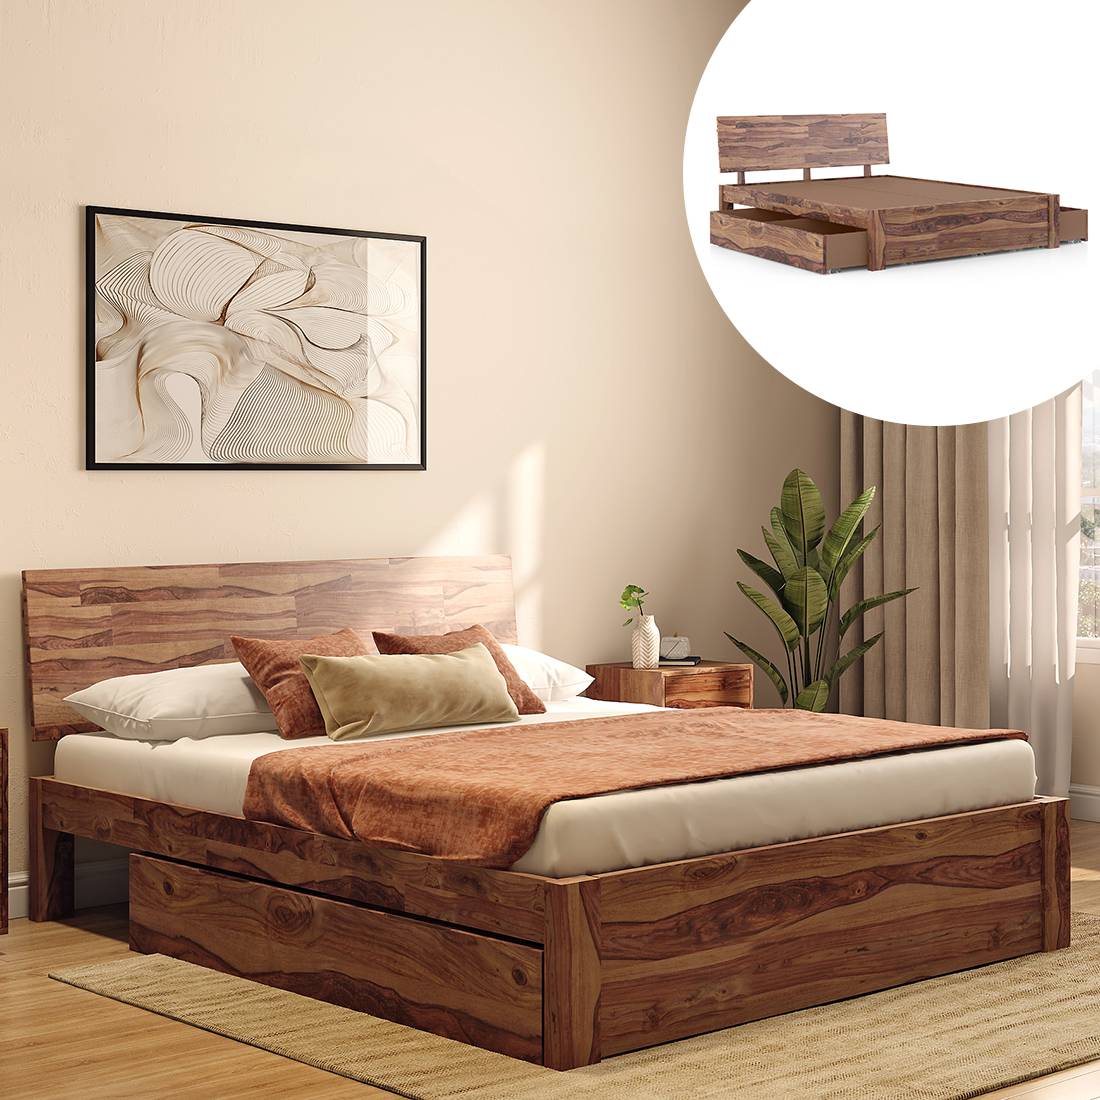 Up to 70% on 700+ Modern Bed Designs | Full House Sale - Urban Ladder